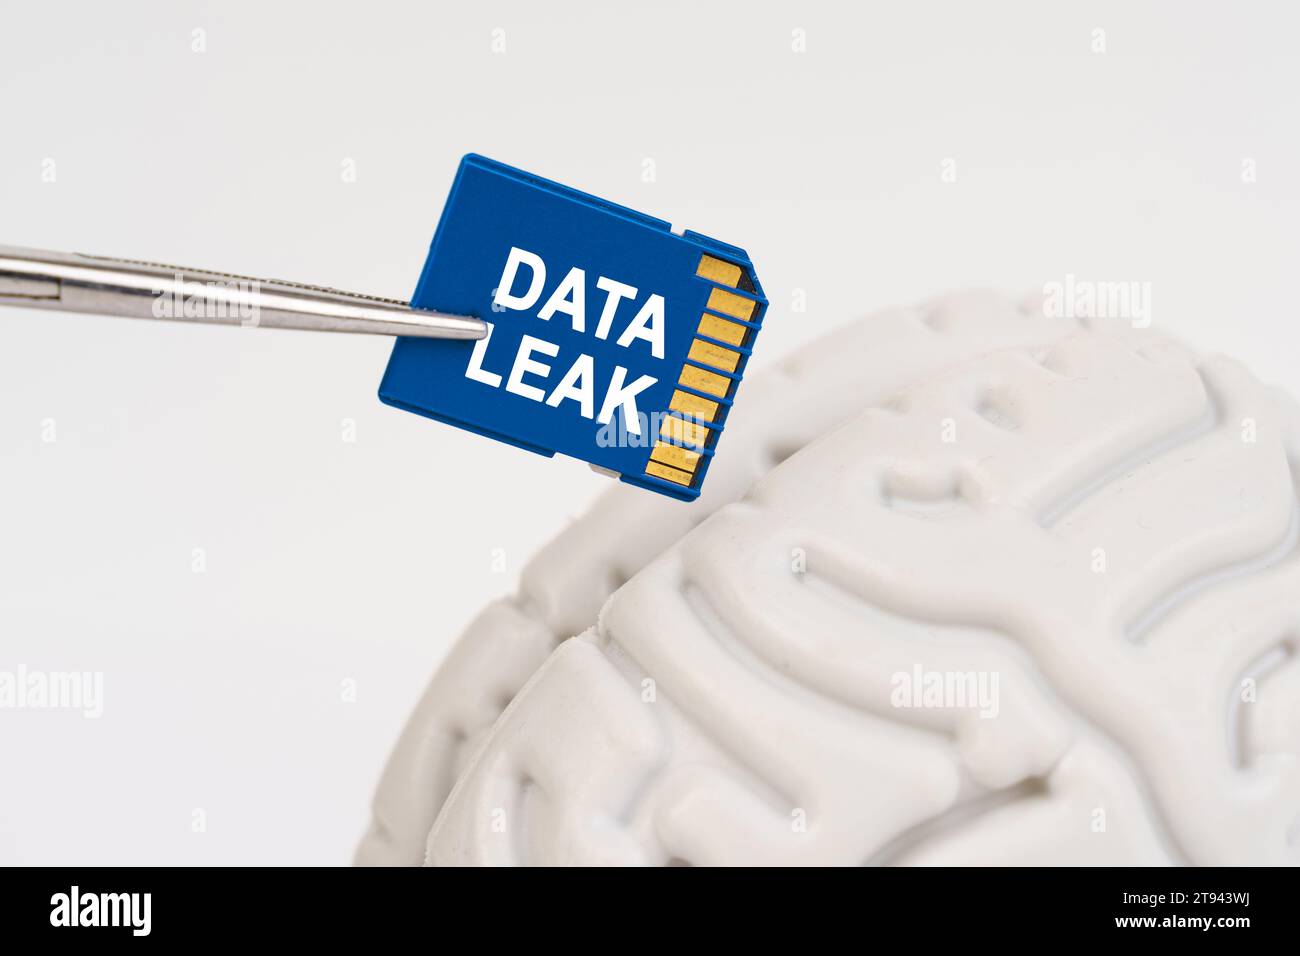 A man inserts a memory card into his brain with the inscription - DATA LEAK. Science and technology concept. Stock Photo